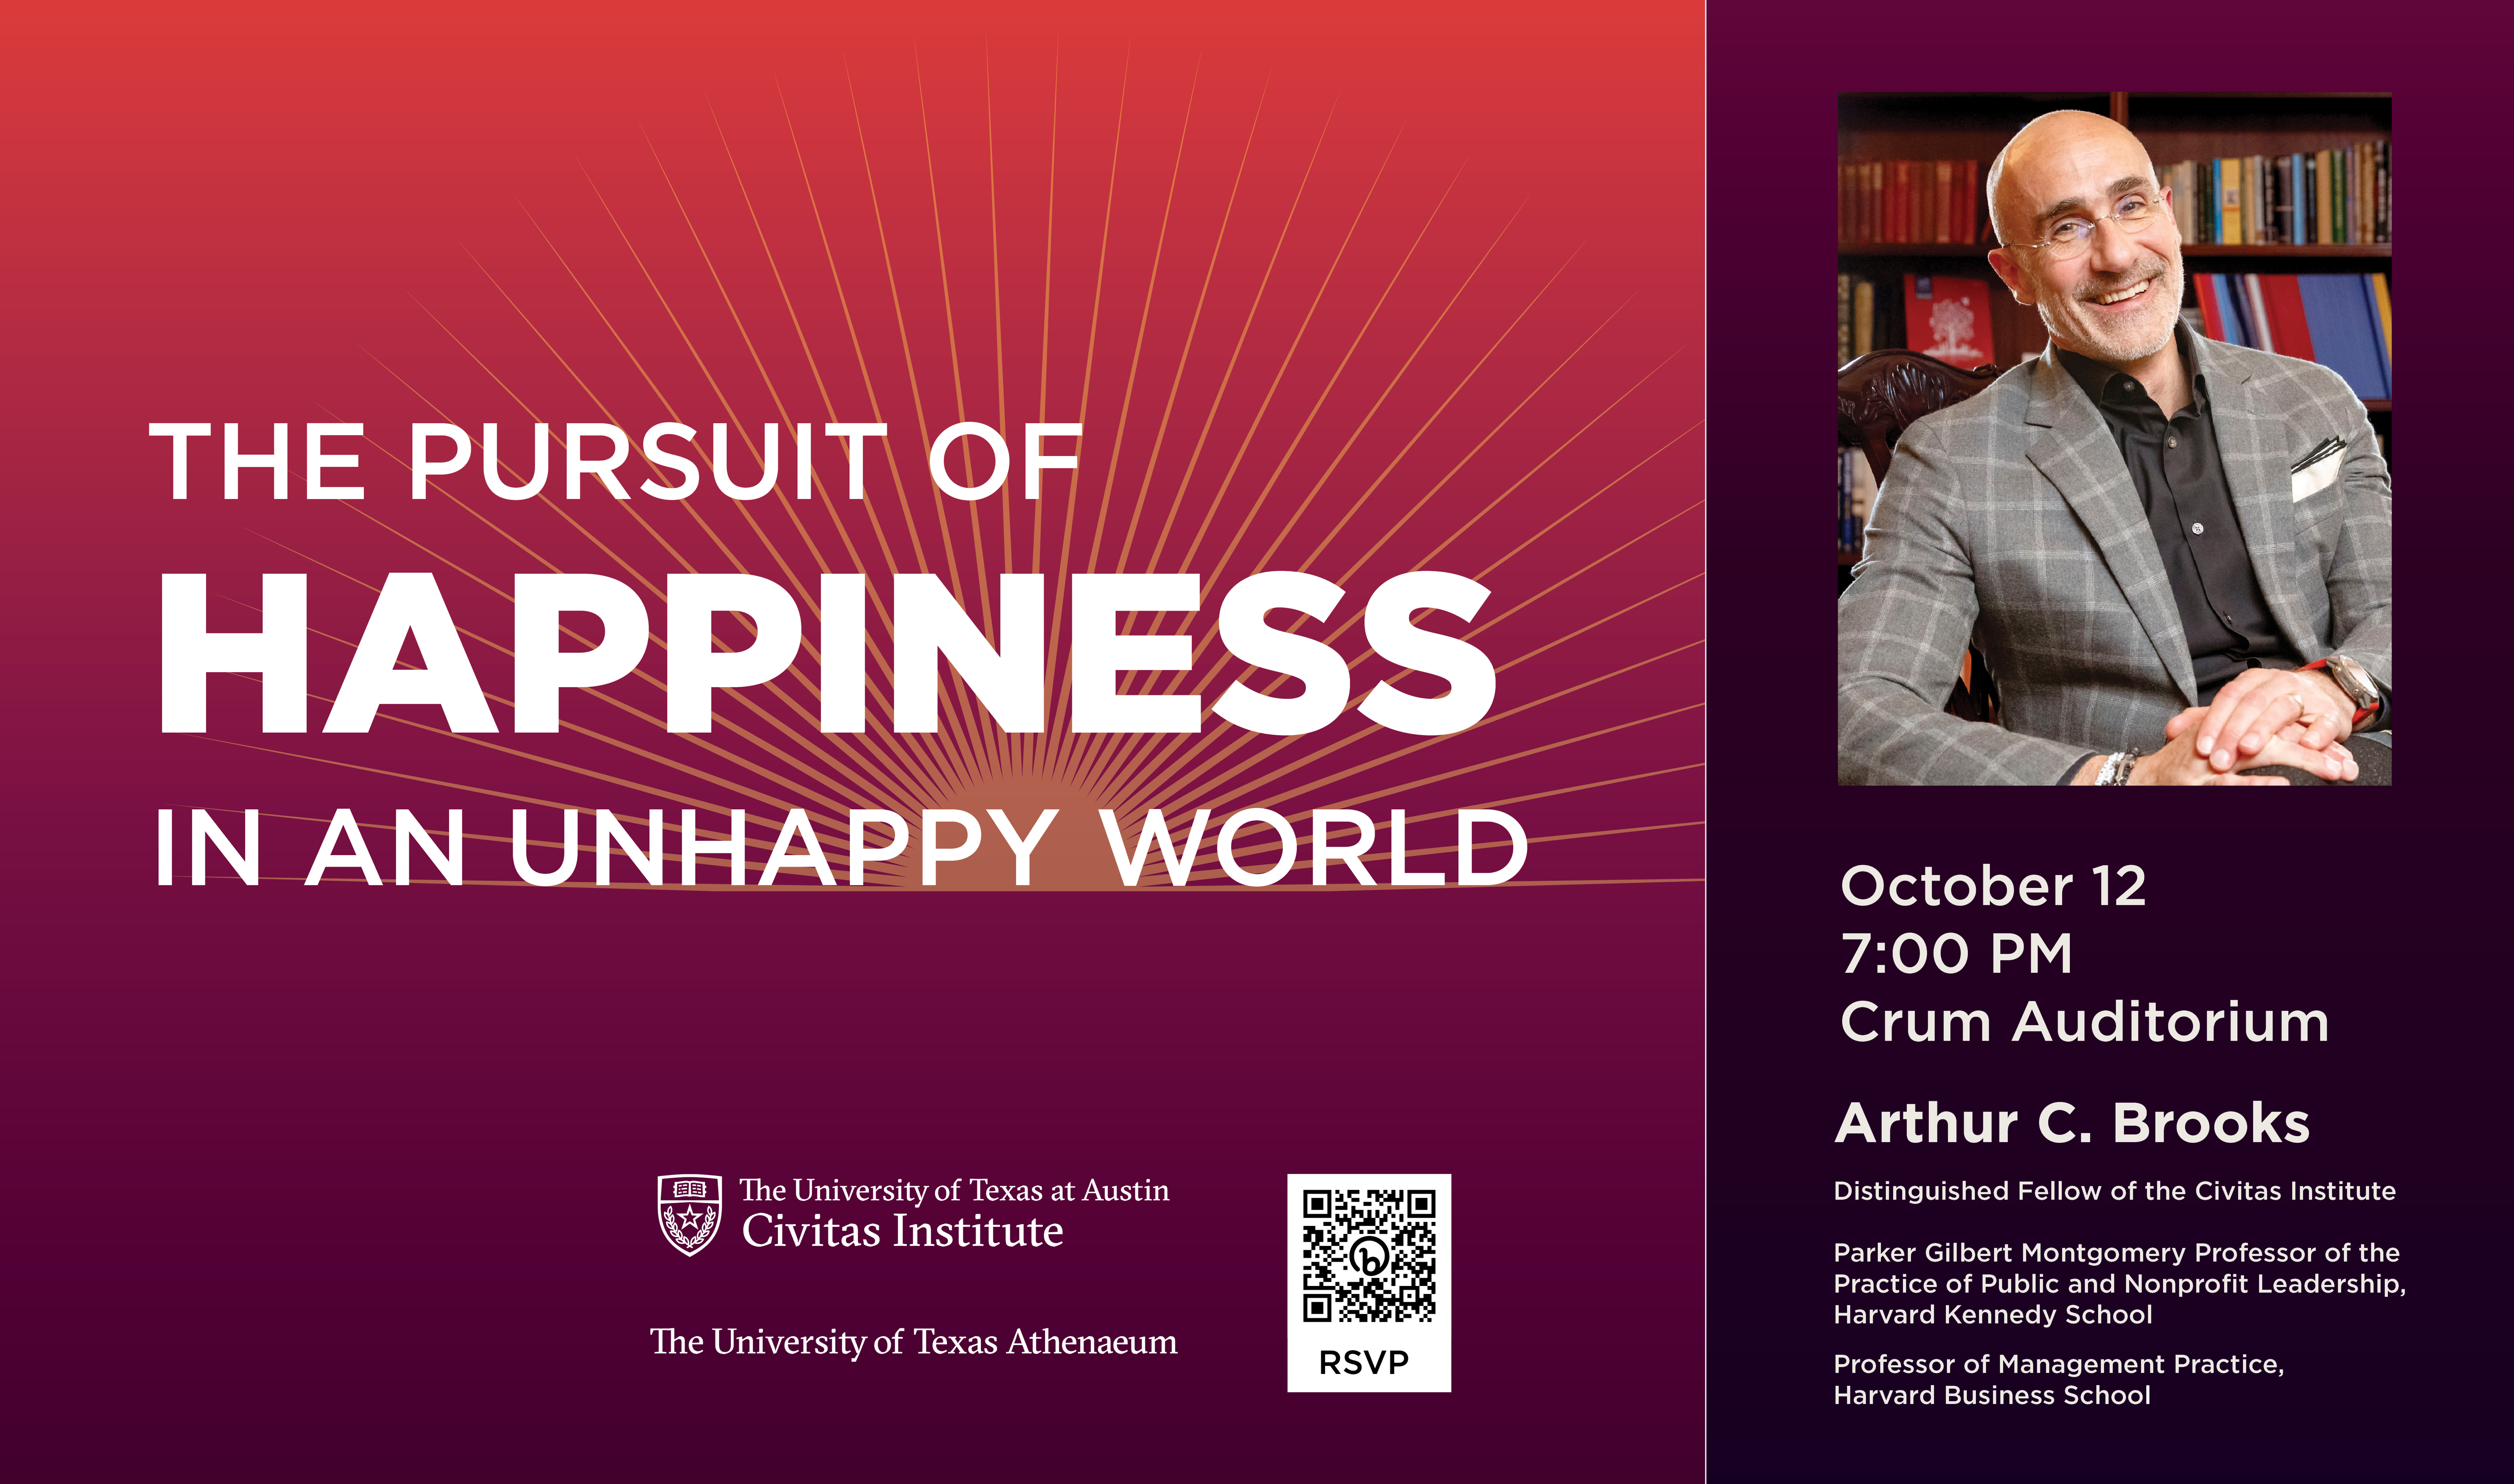 Poster announcing a public lecture called The Pursuit of Happiness in an Unhappy World, being given on October 12 by Arthur C. Brooks.